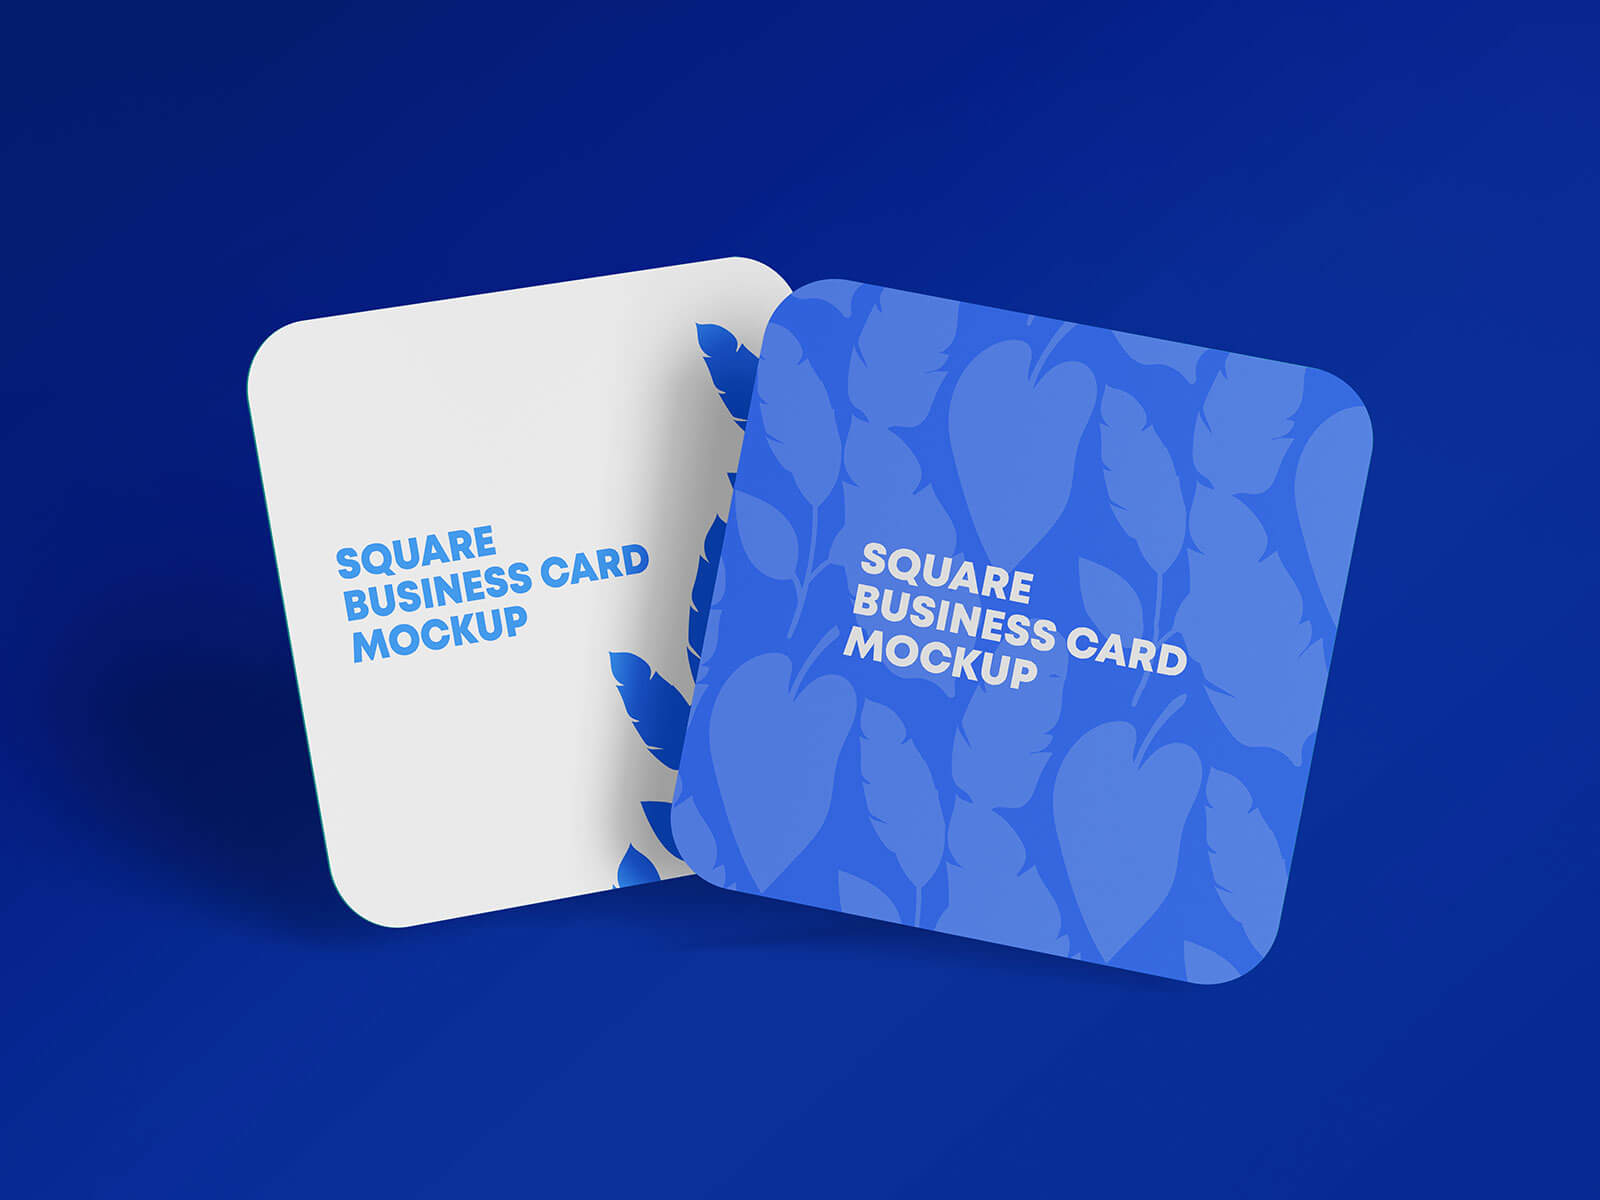 rounded corner square business cards 3